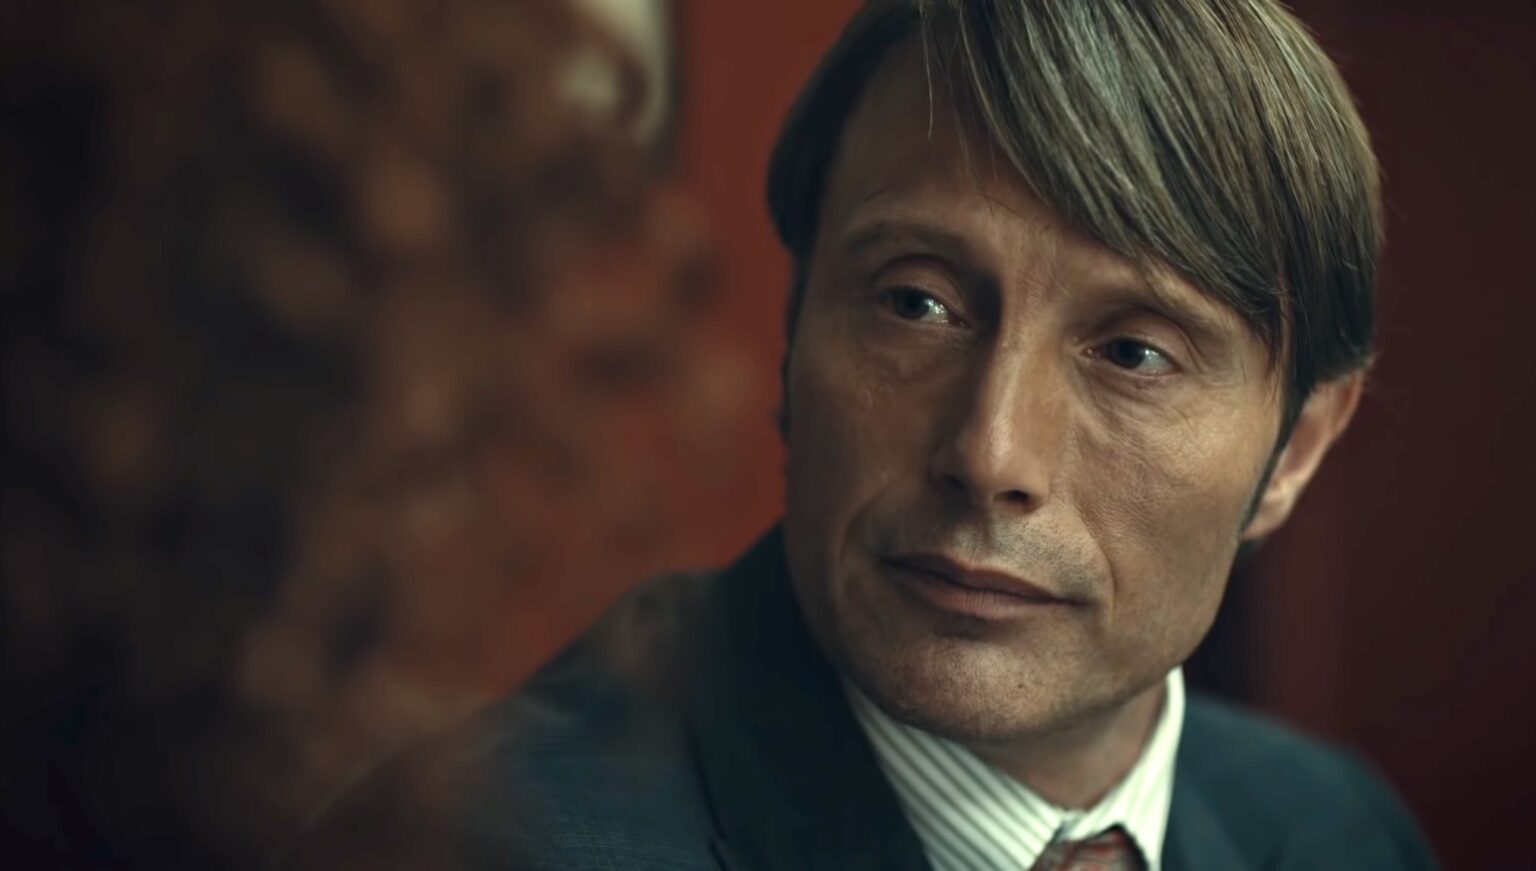 Does CBS's Clarice have your excitement more silent than a lamb? Go watch Hannibal, instead! Learn why fans are begging for Hannibal season 4.